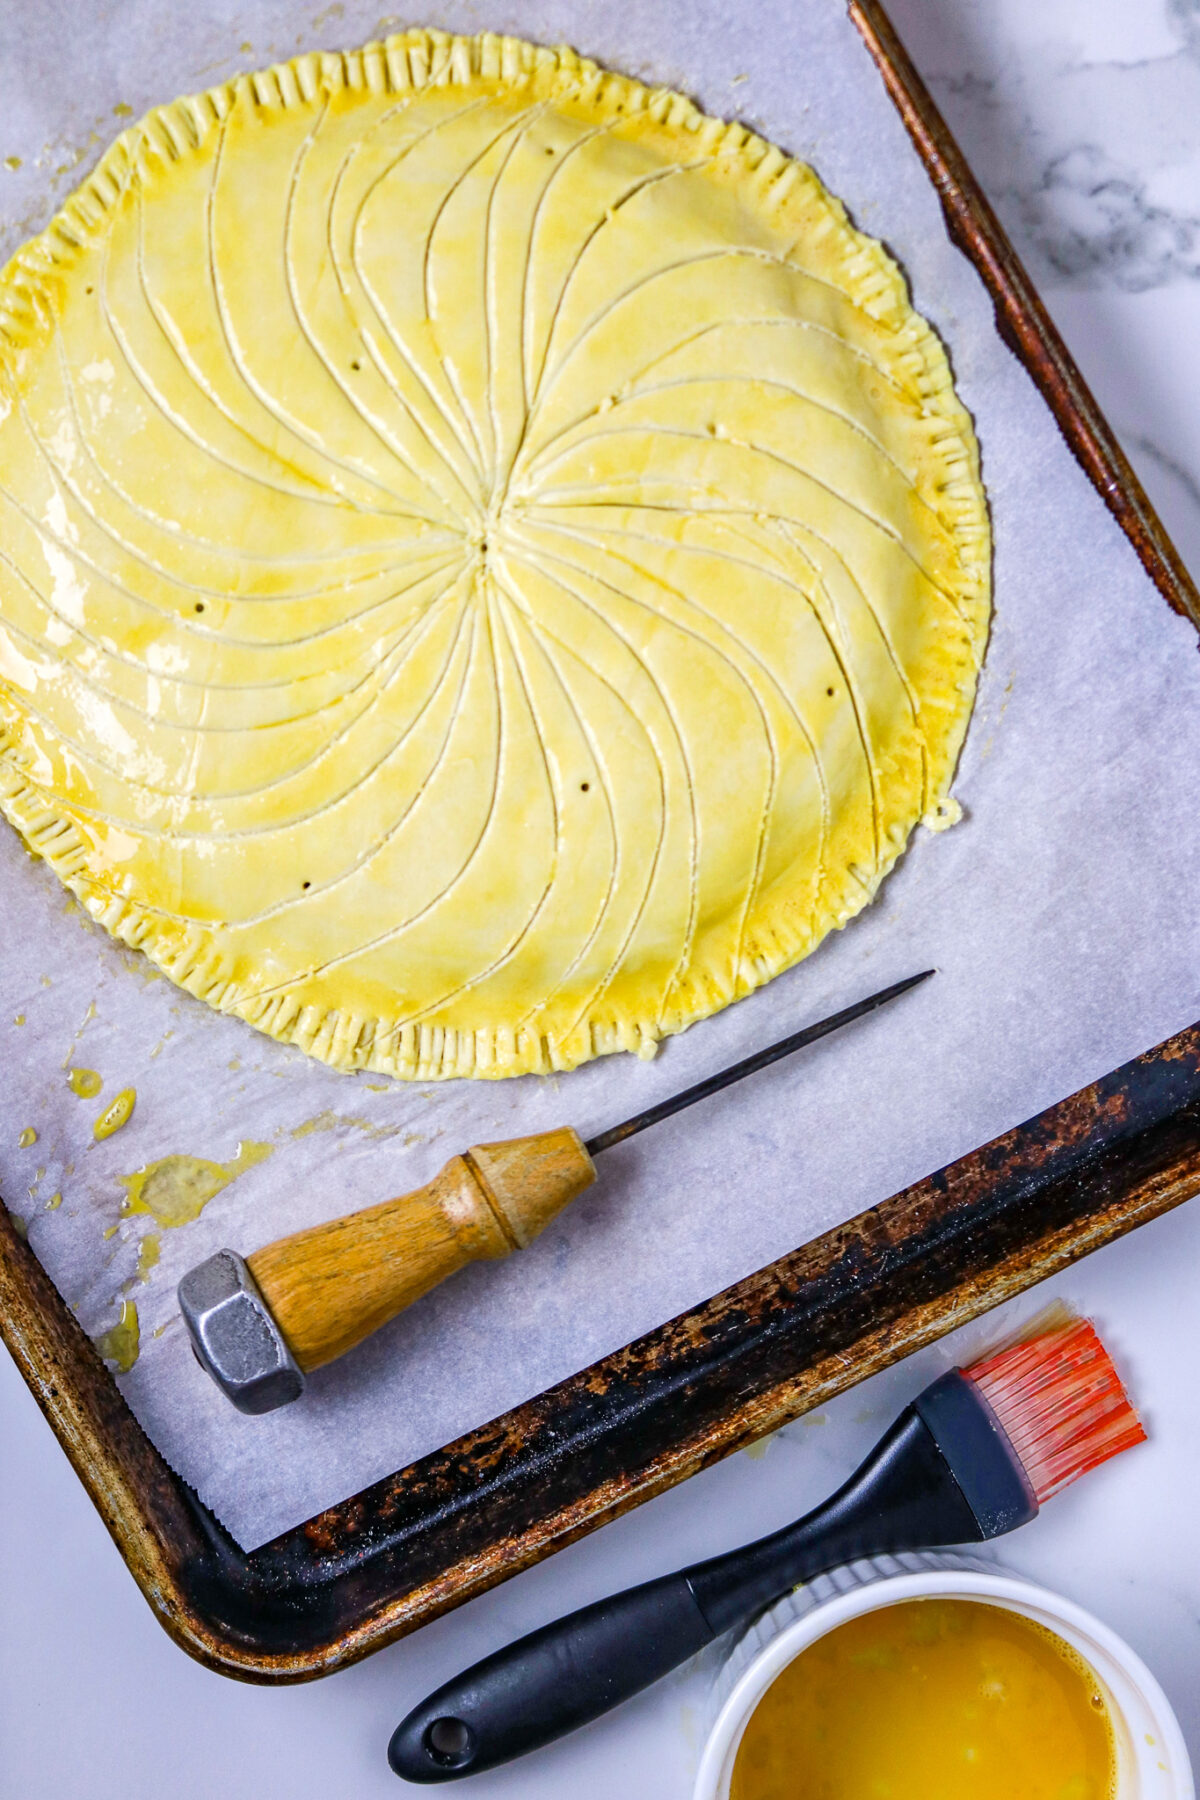 An unbaked round puff pastry for a Galette Des Rois with an ice pick next to it.